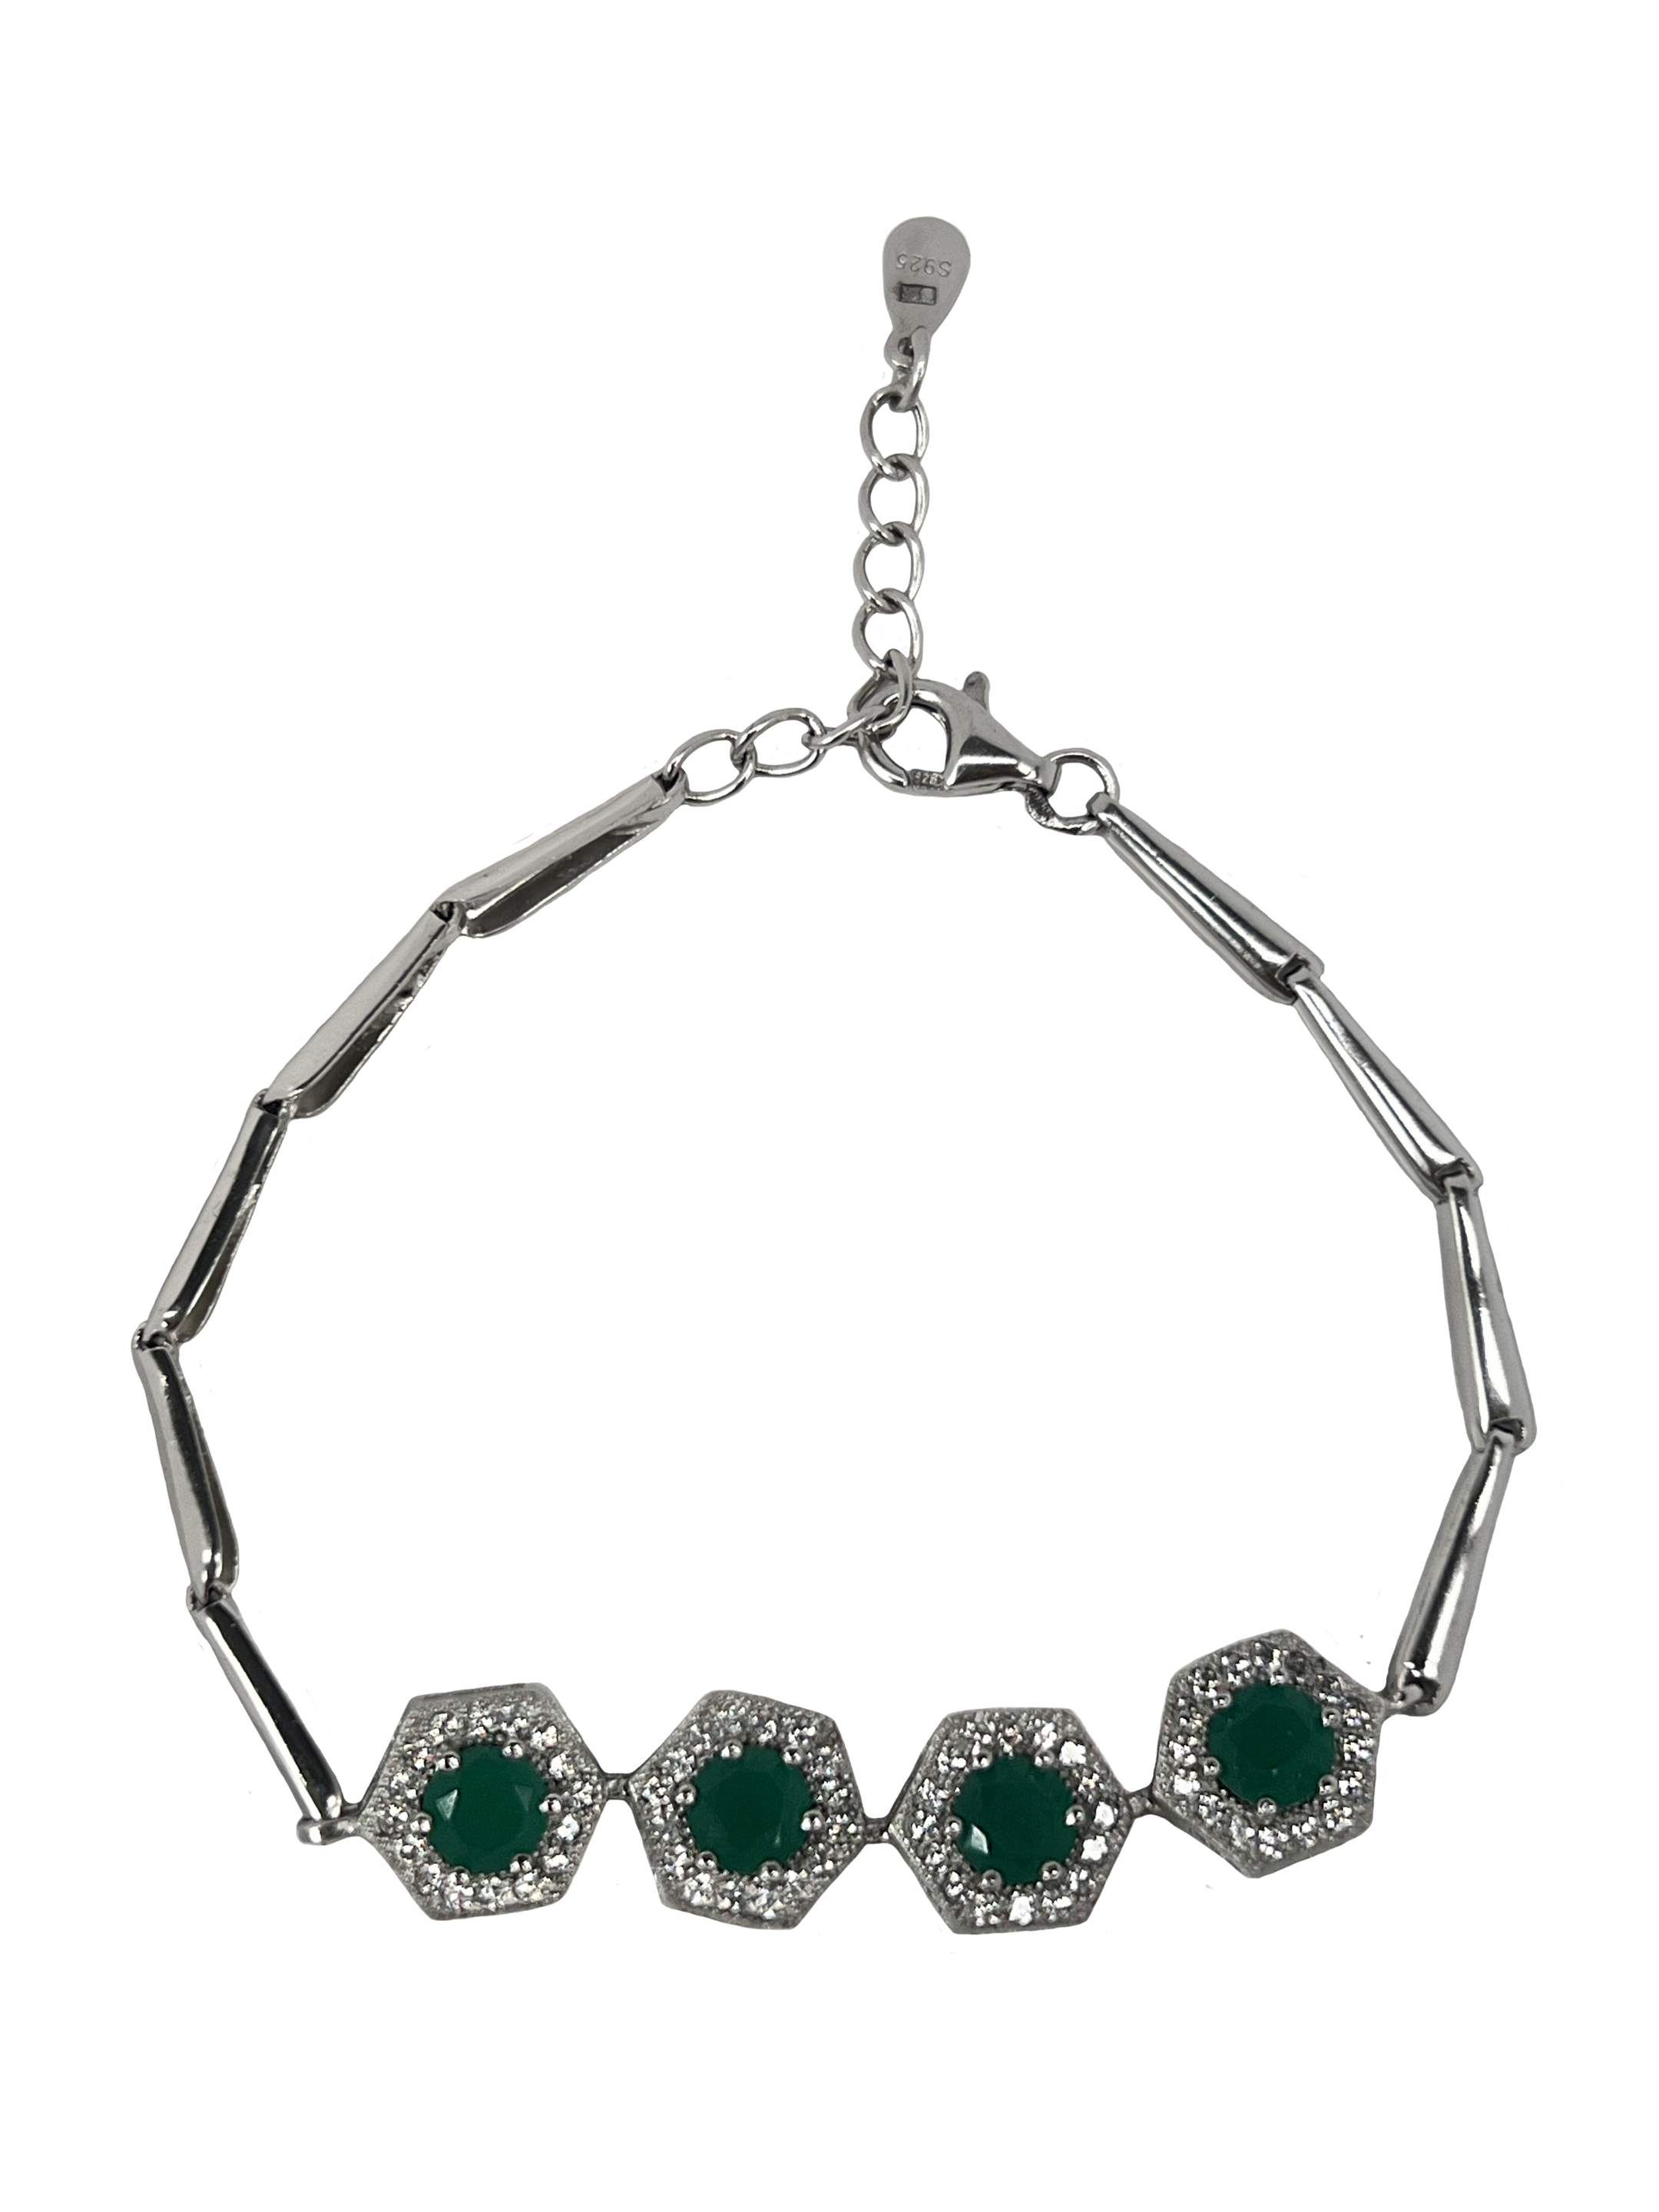 Silver bracelet with green crystals